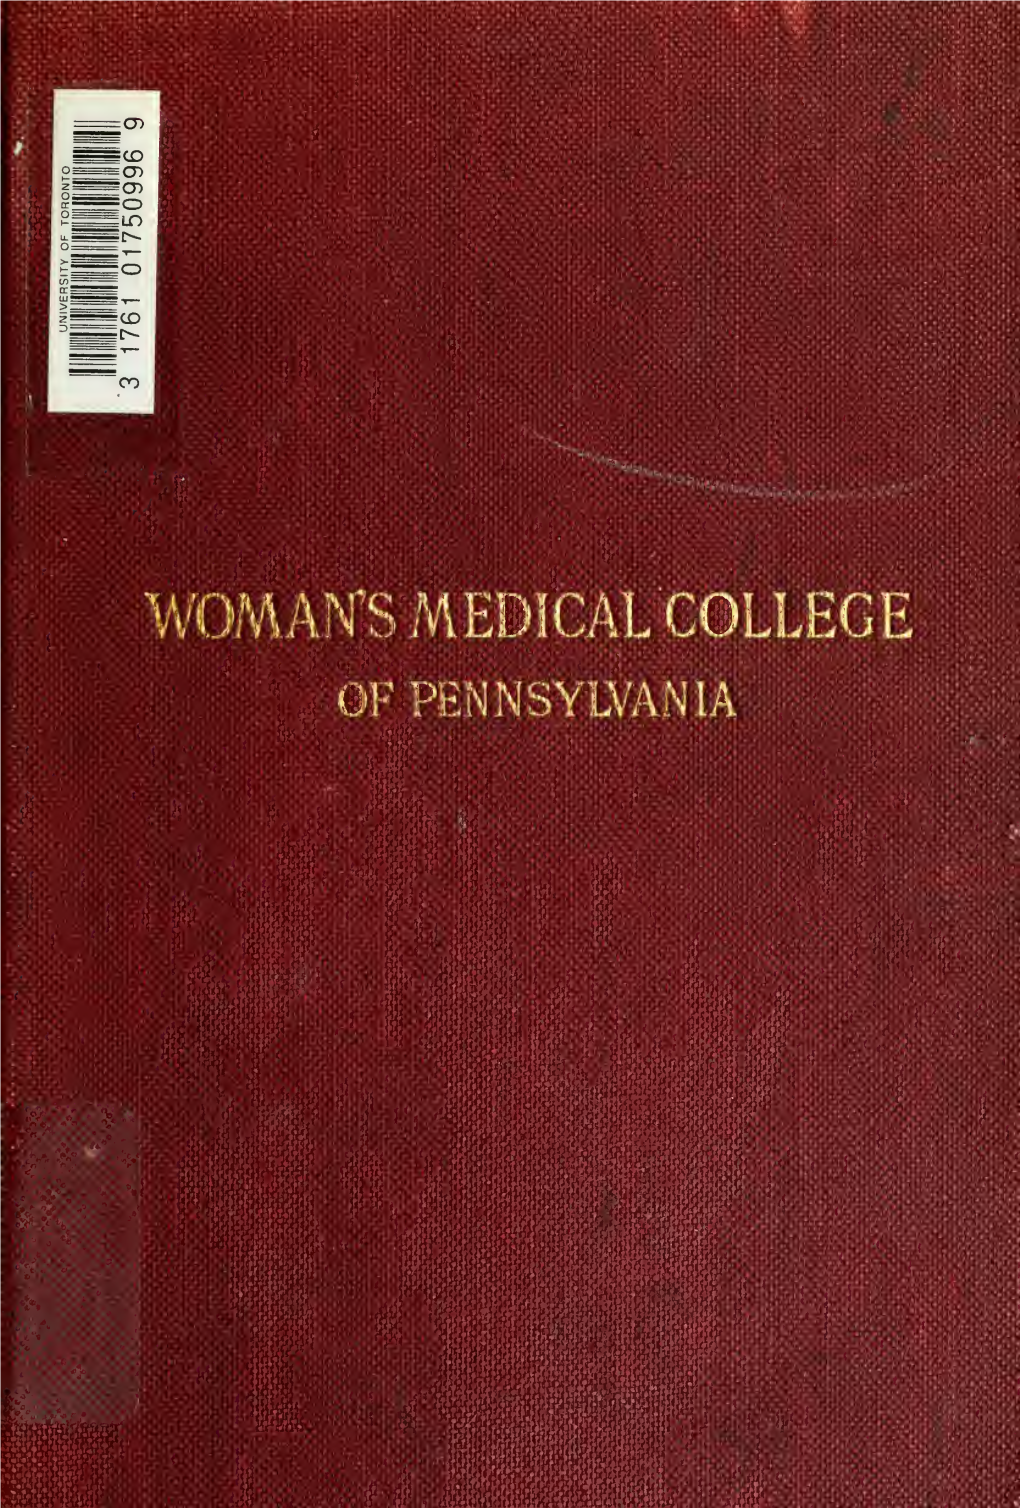 The Woman's Medical College of Pennsylvania : an Historical Outline